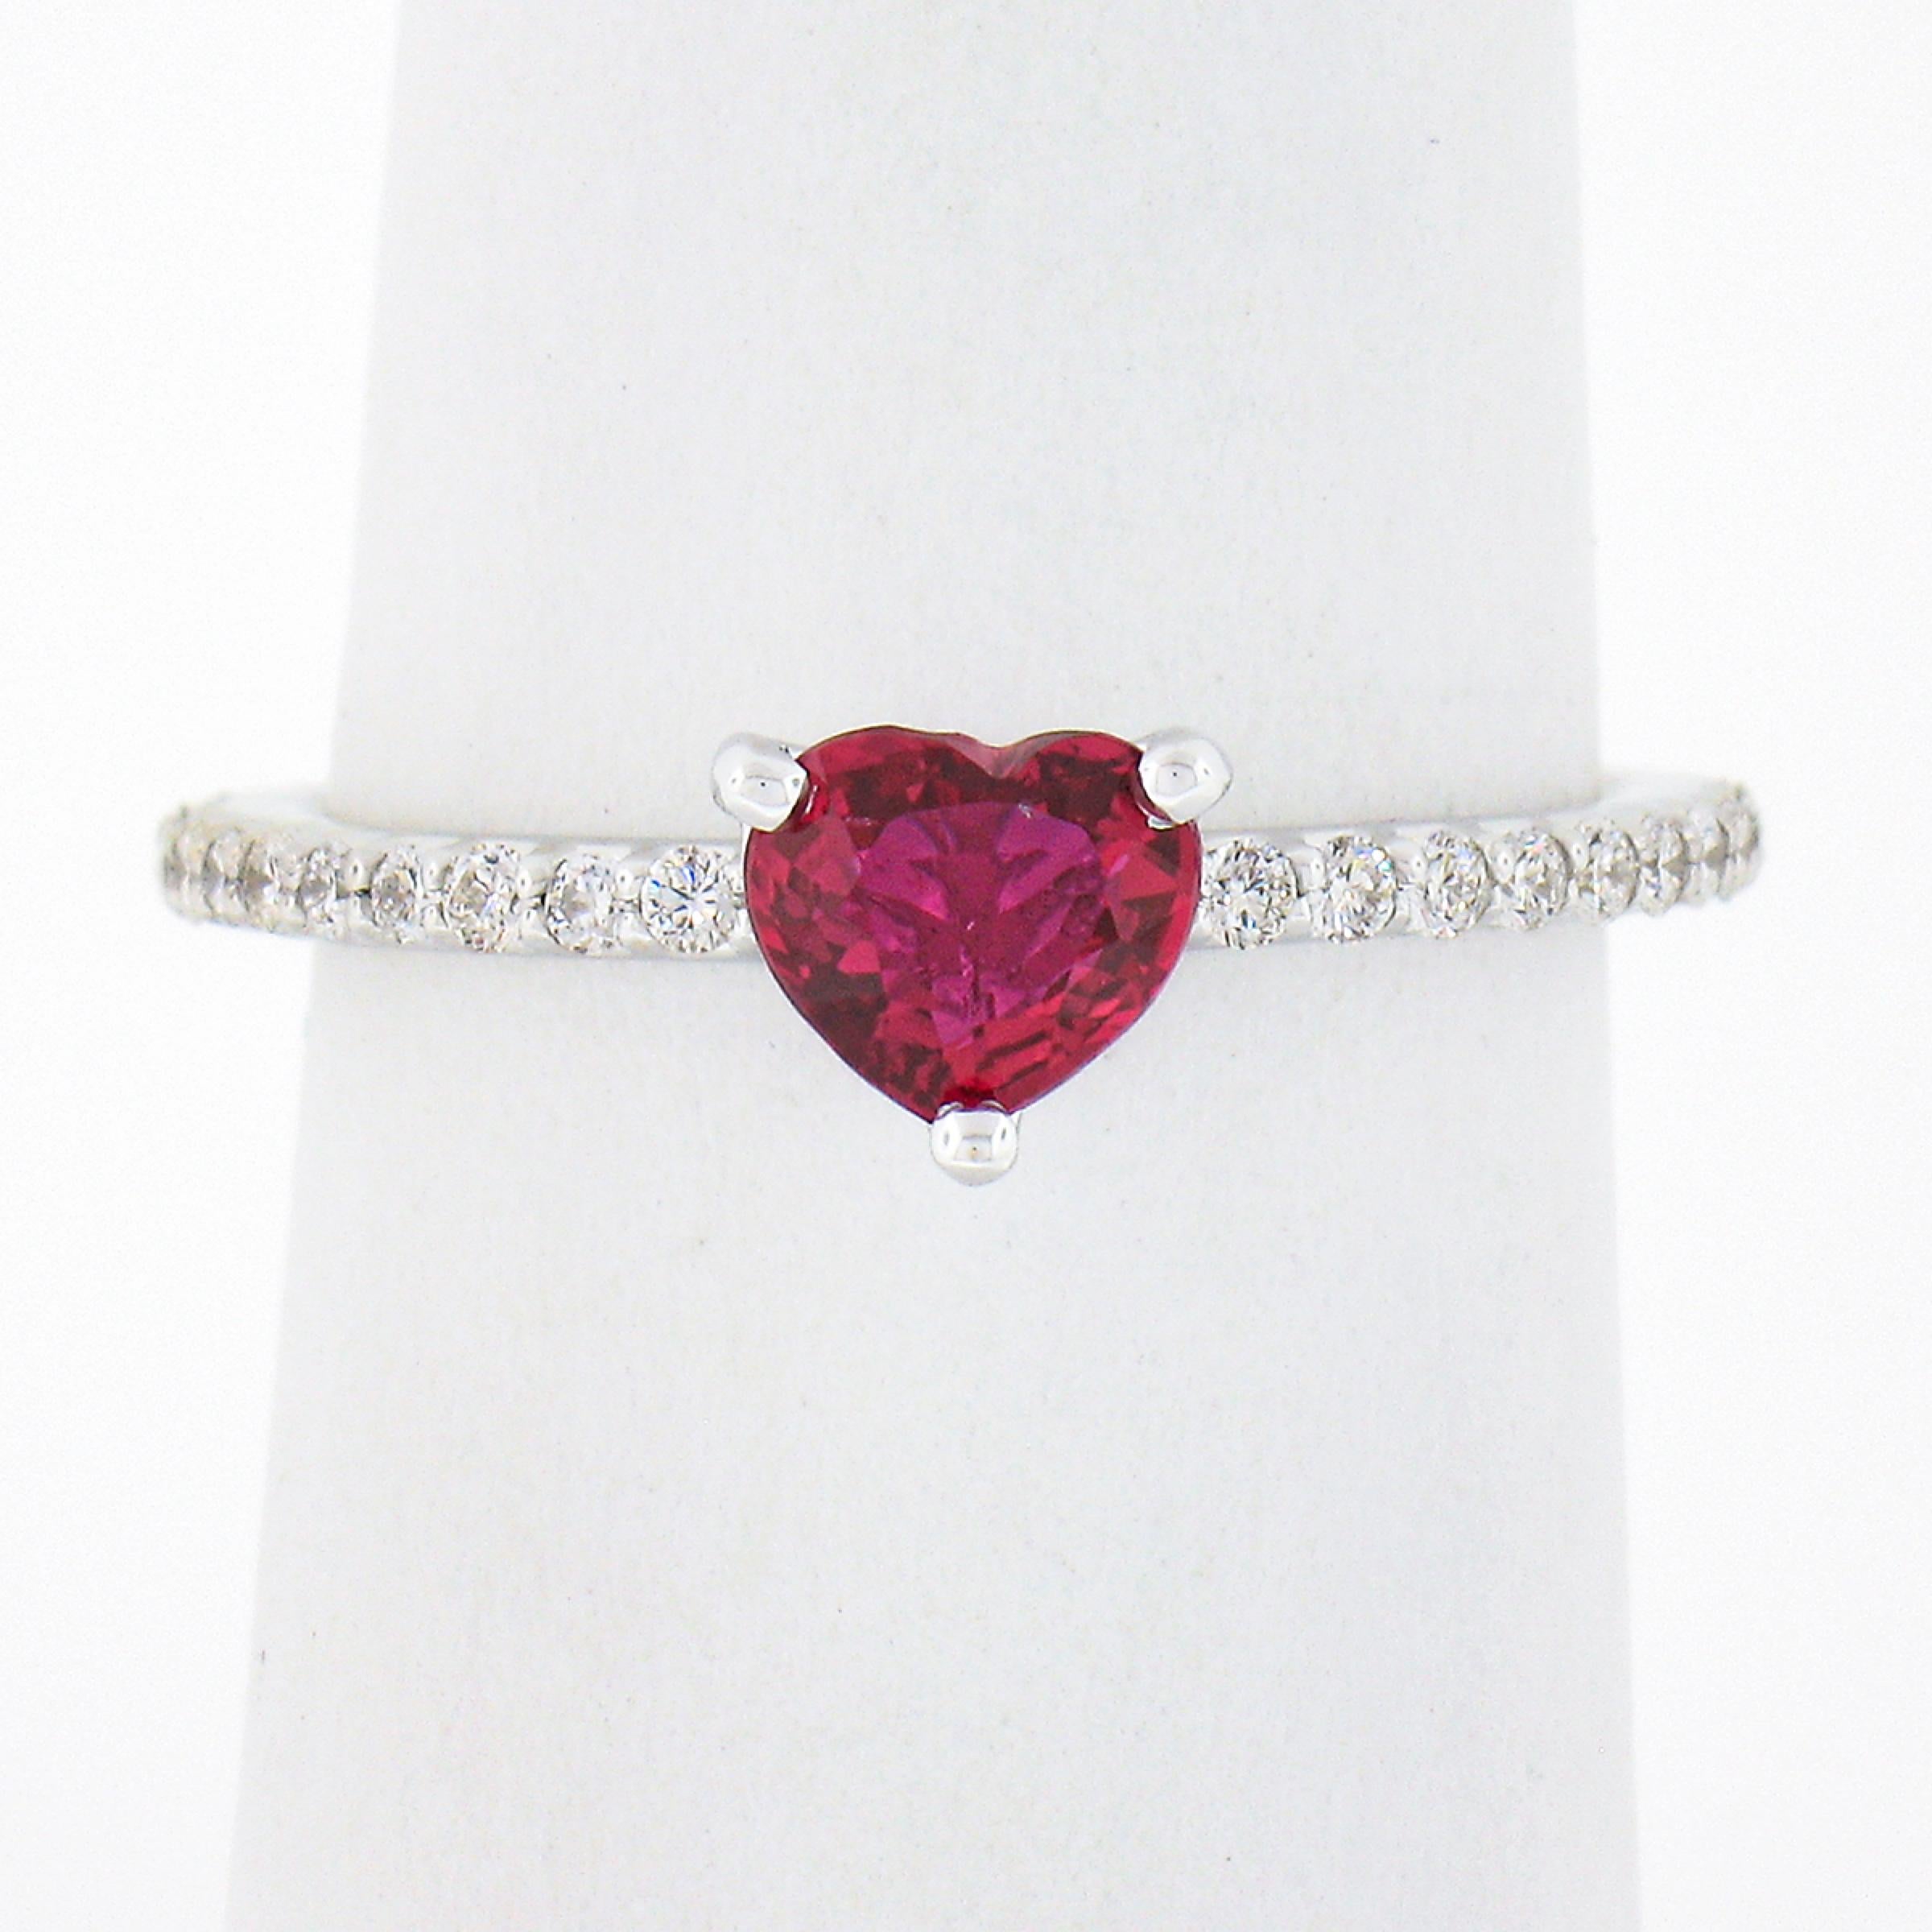 Here we have an absolutely lovely ring that is newly crafted from solid 18k white gold featuring a gorgeous heart shaped, GIA certified, natural ruby at its center. This very fine quality ruby has the most attractive and desirable vivid red color